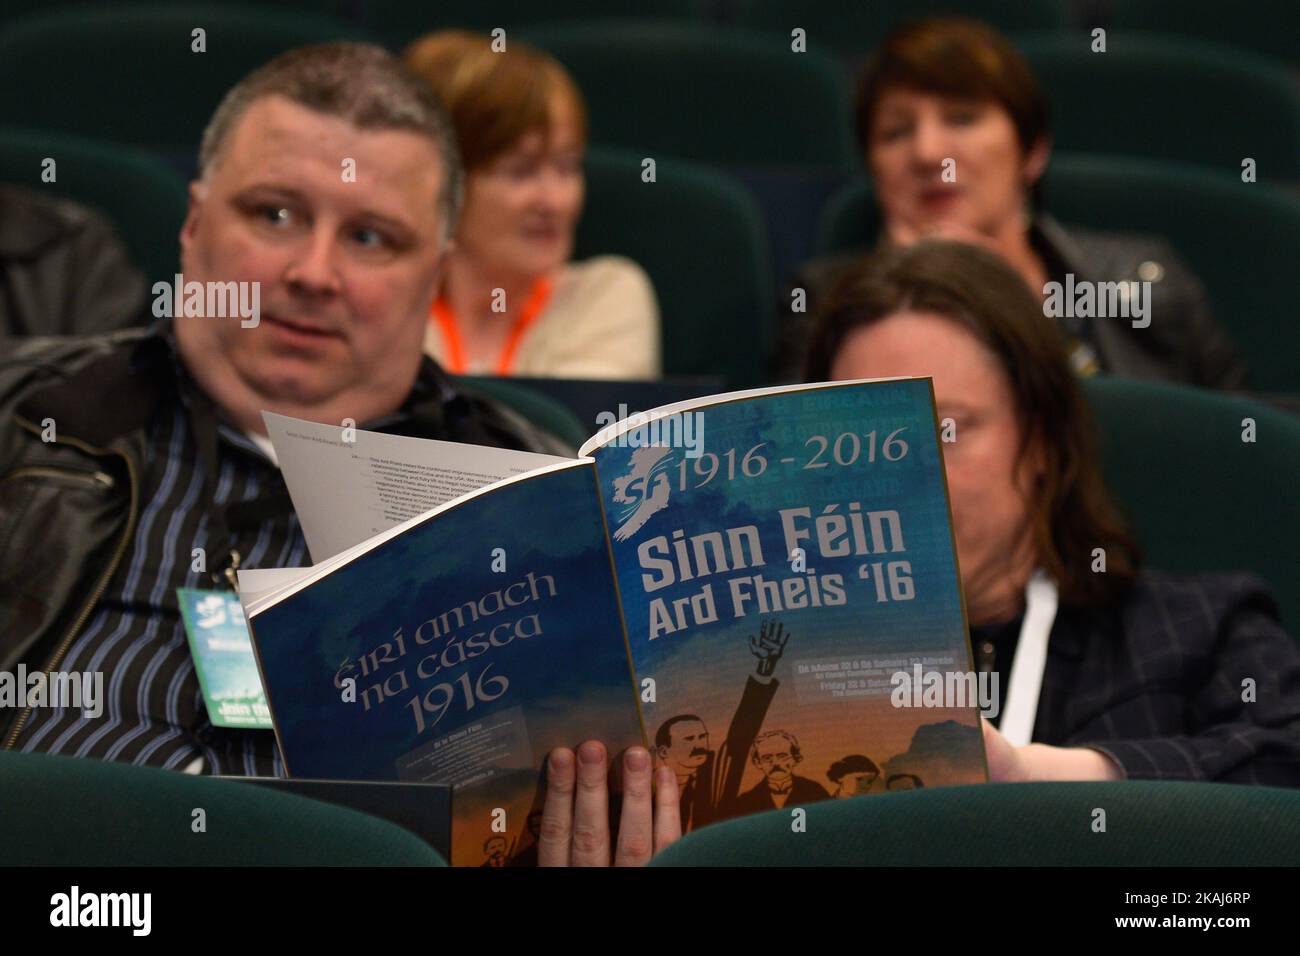 Delegates at the Sinn Fein Ard Fheis 2016 that gets under way in Dublin this evening with around 2,000 delegates set to more than 100 motions over the next two days, including topics like 1916 Centenary and Irish Unity, the achievements of the peace process and the ongoing challenge of reconciliation, the health and water charges. Dublin, Ireland, on Friday, 22 April 2016. *** Please Use Credit from Credit Field *** Stock Photo